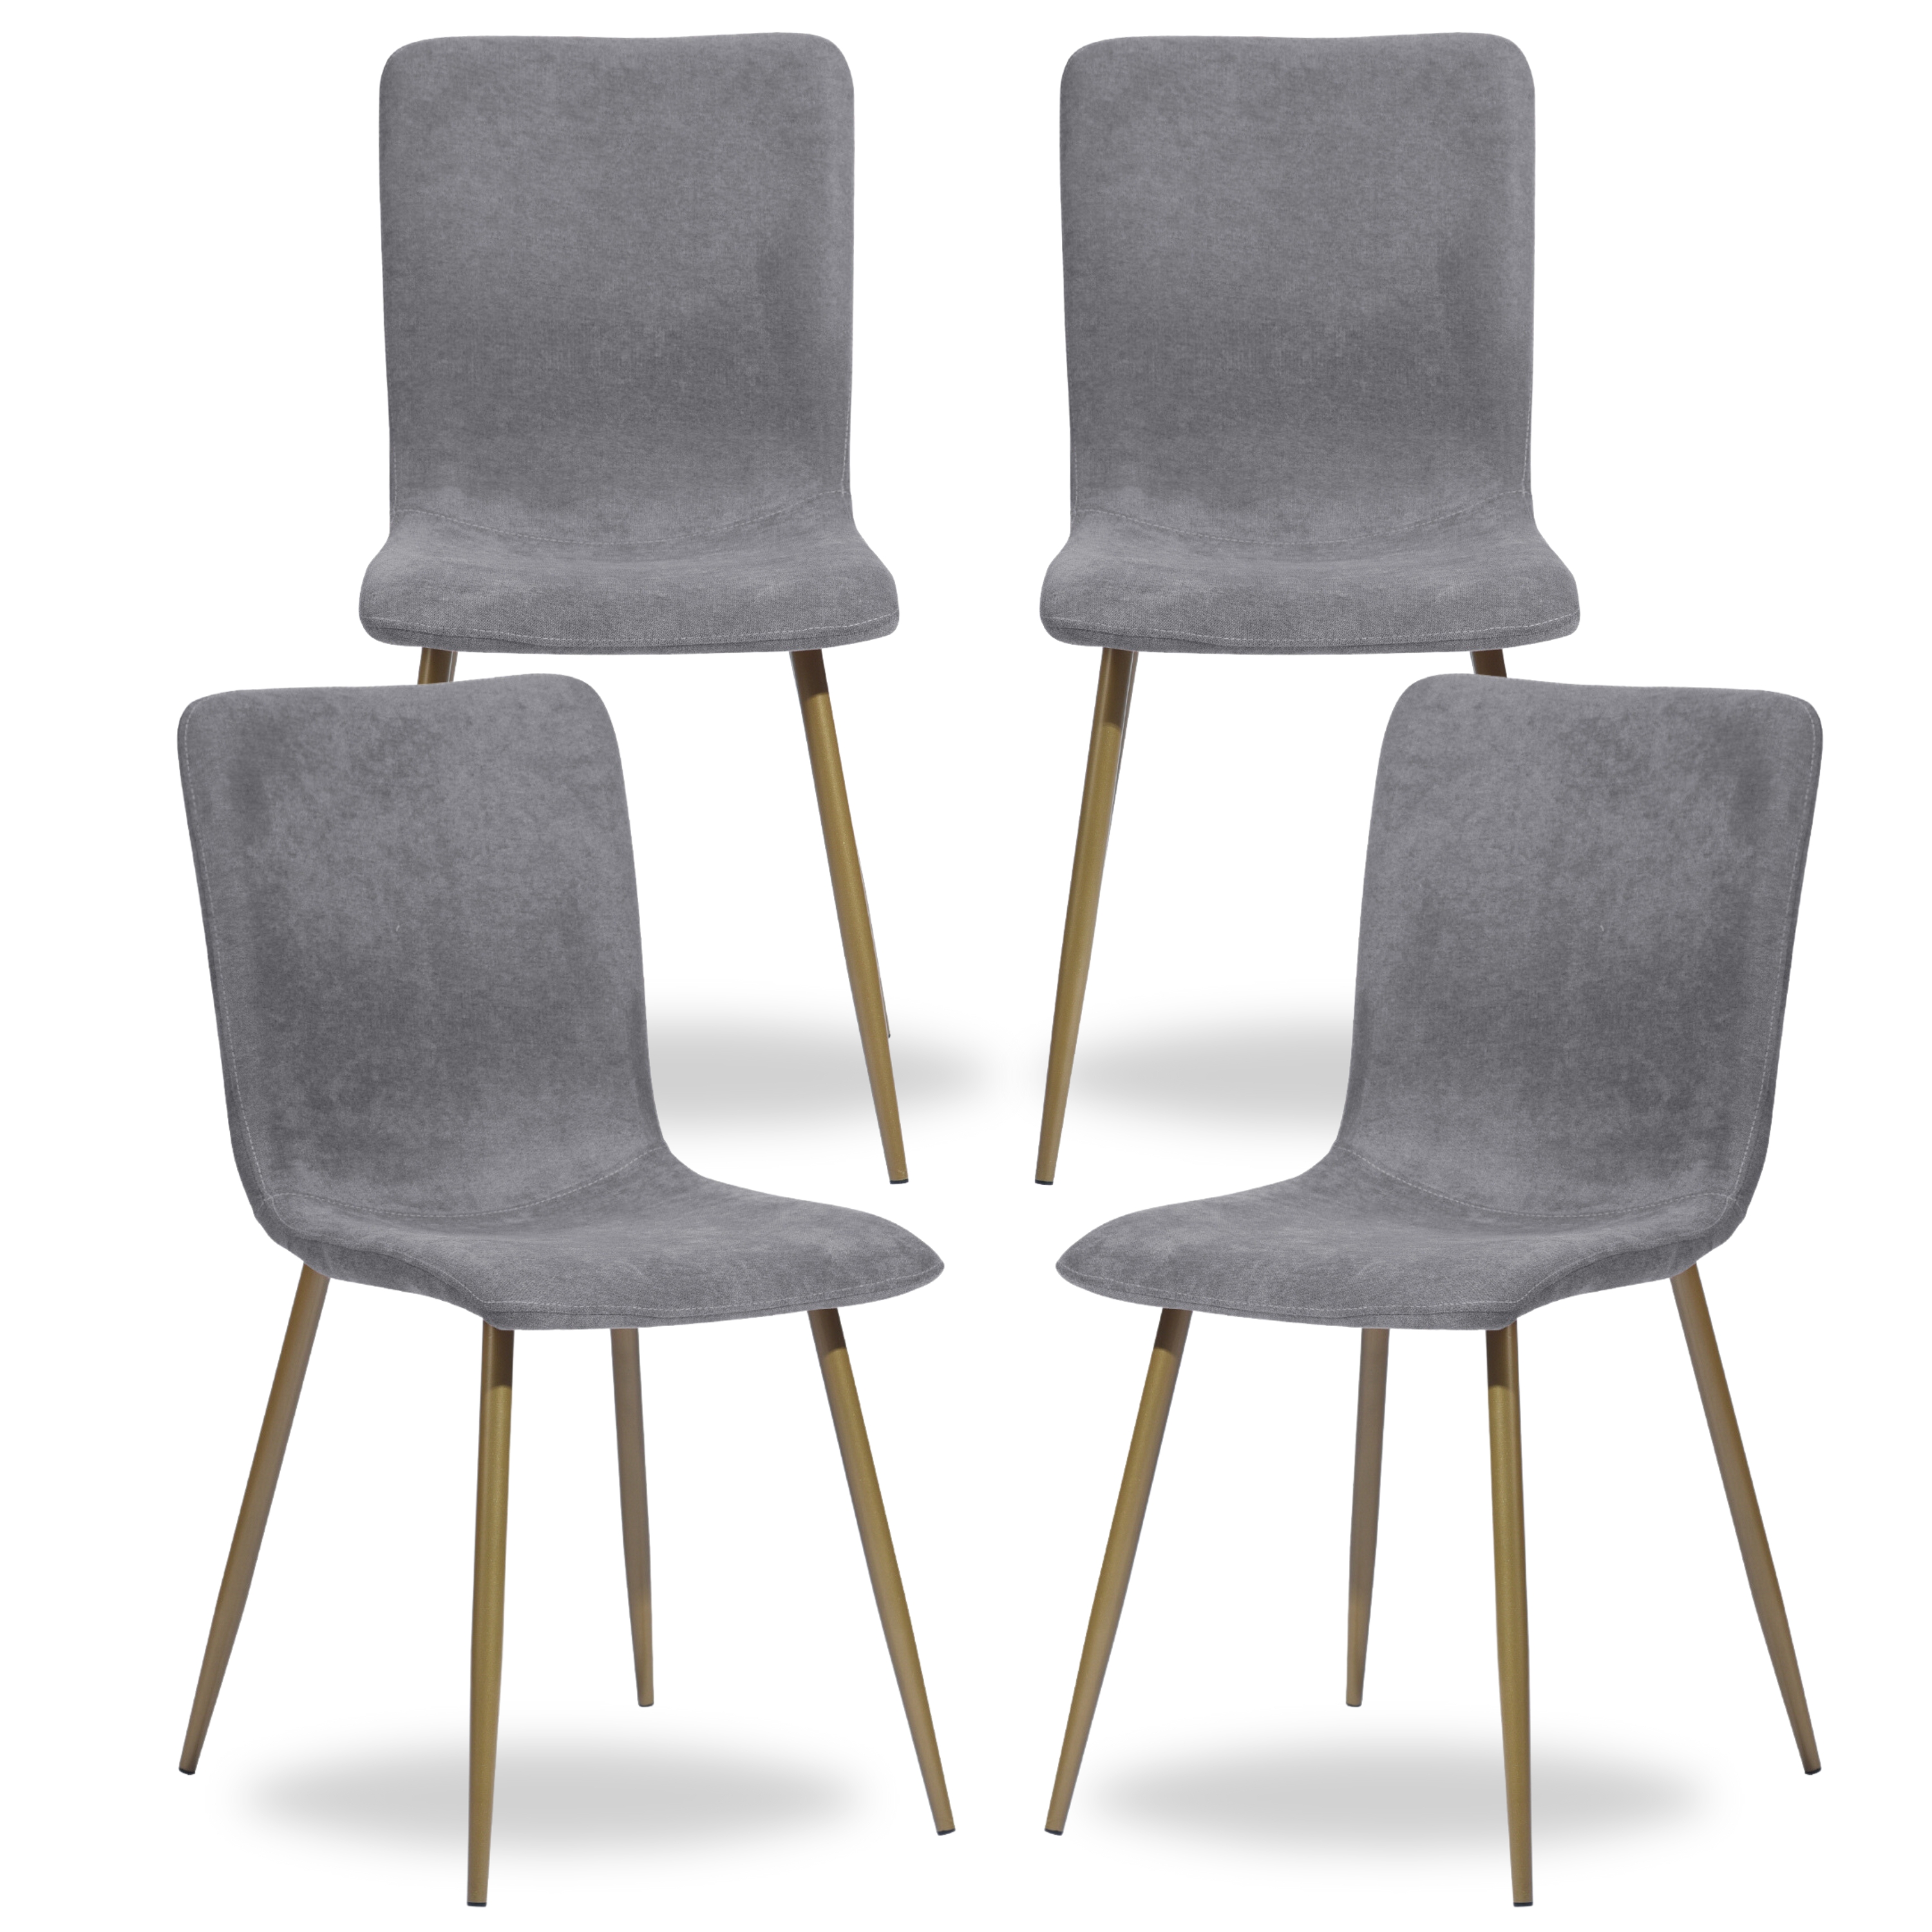 Homy Casa Modern Velvet Dining Chairs Set of 4 - Comfortable Faux Upholstery with Metal Legs, Dark Gray - image 1 of 8